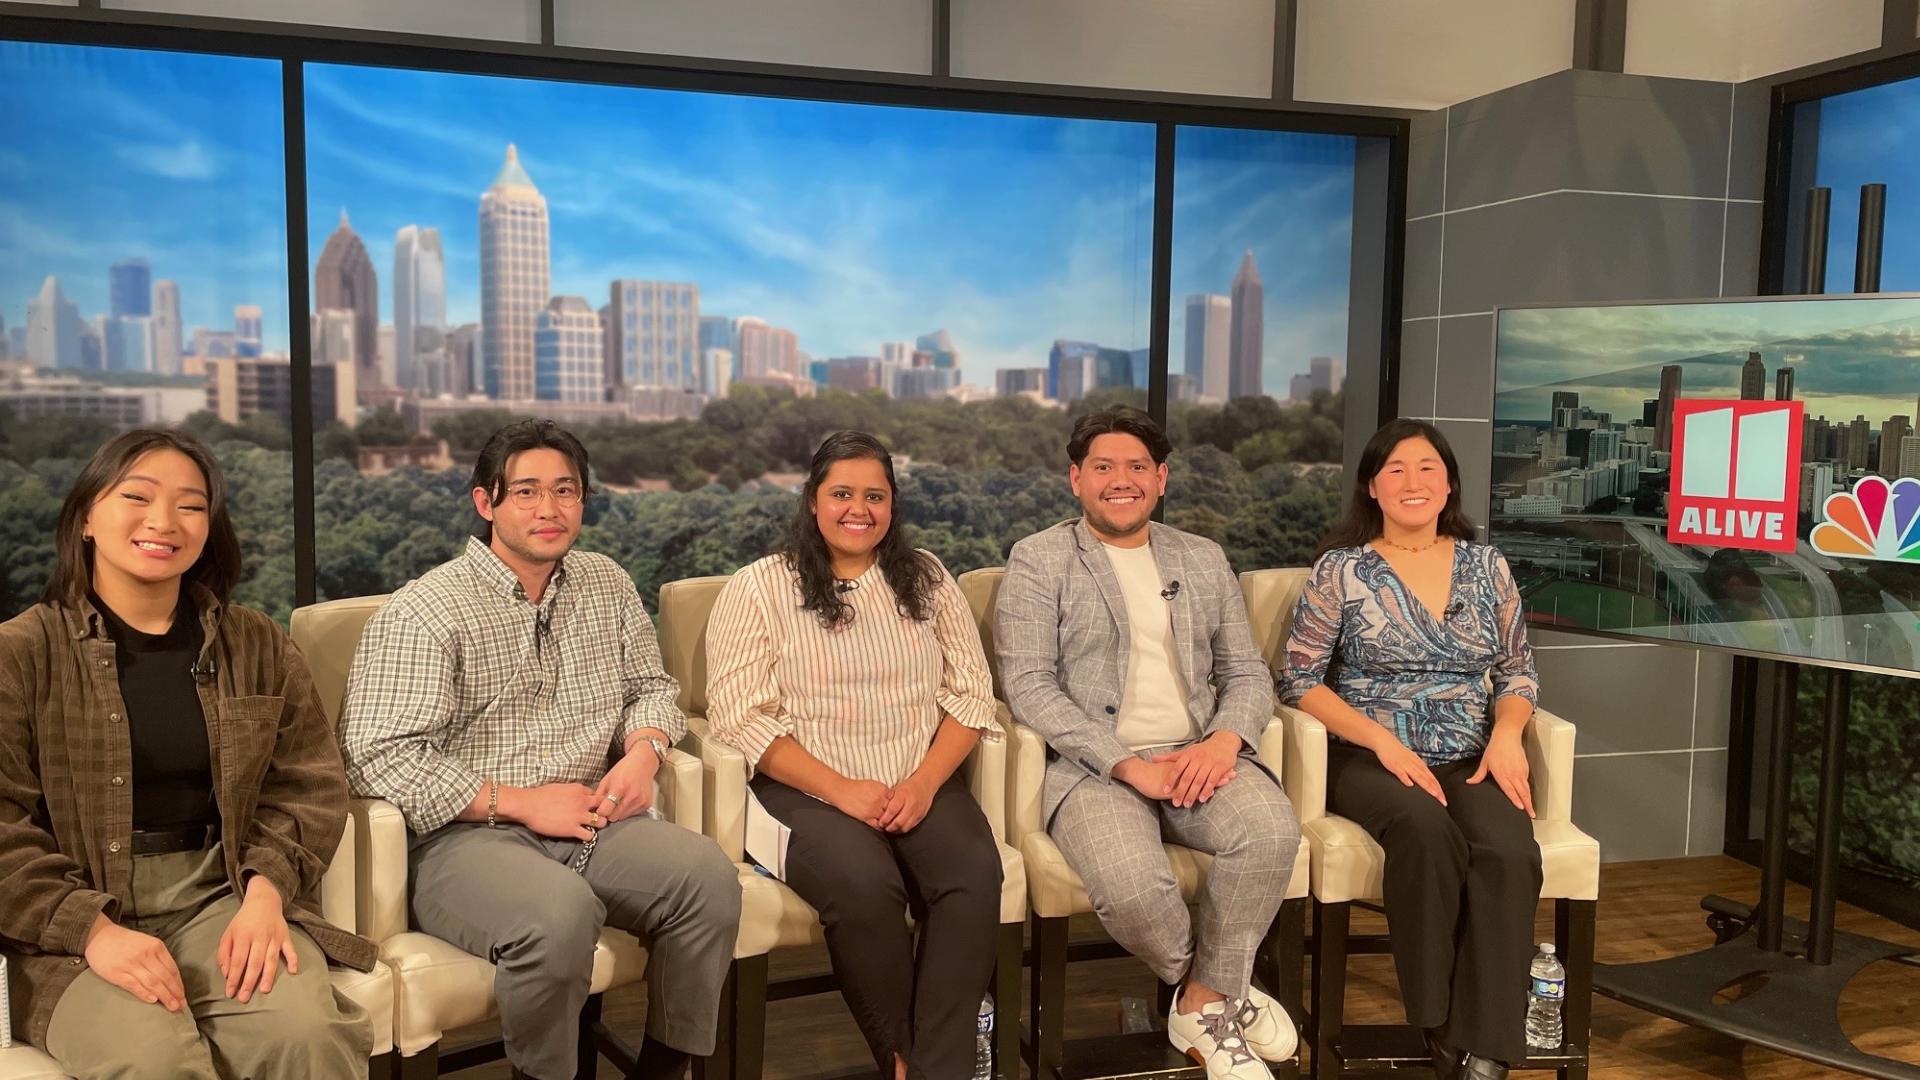 To help get a scope of what it's like to be an AAPI Georgian, 11Alive brought together five people to learn about their cultures.